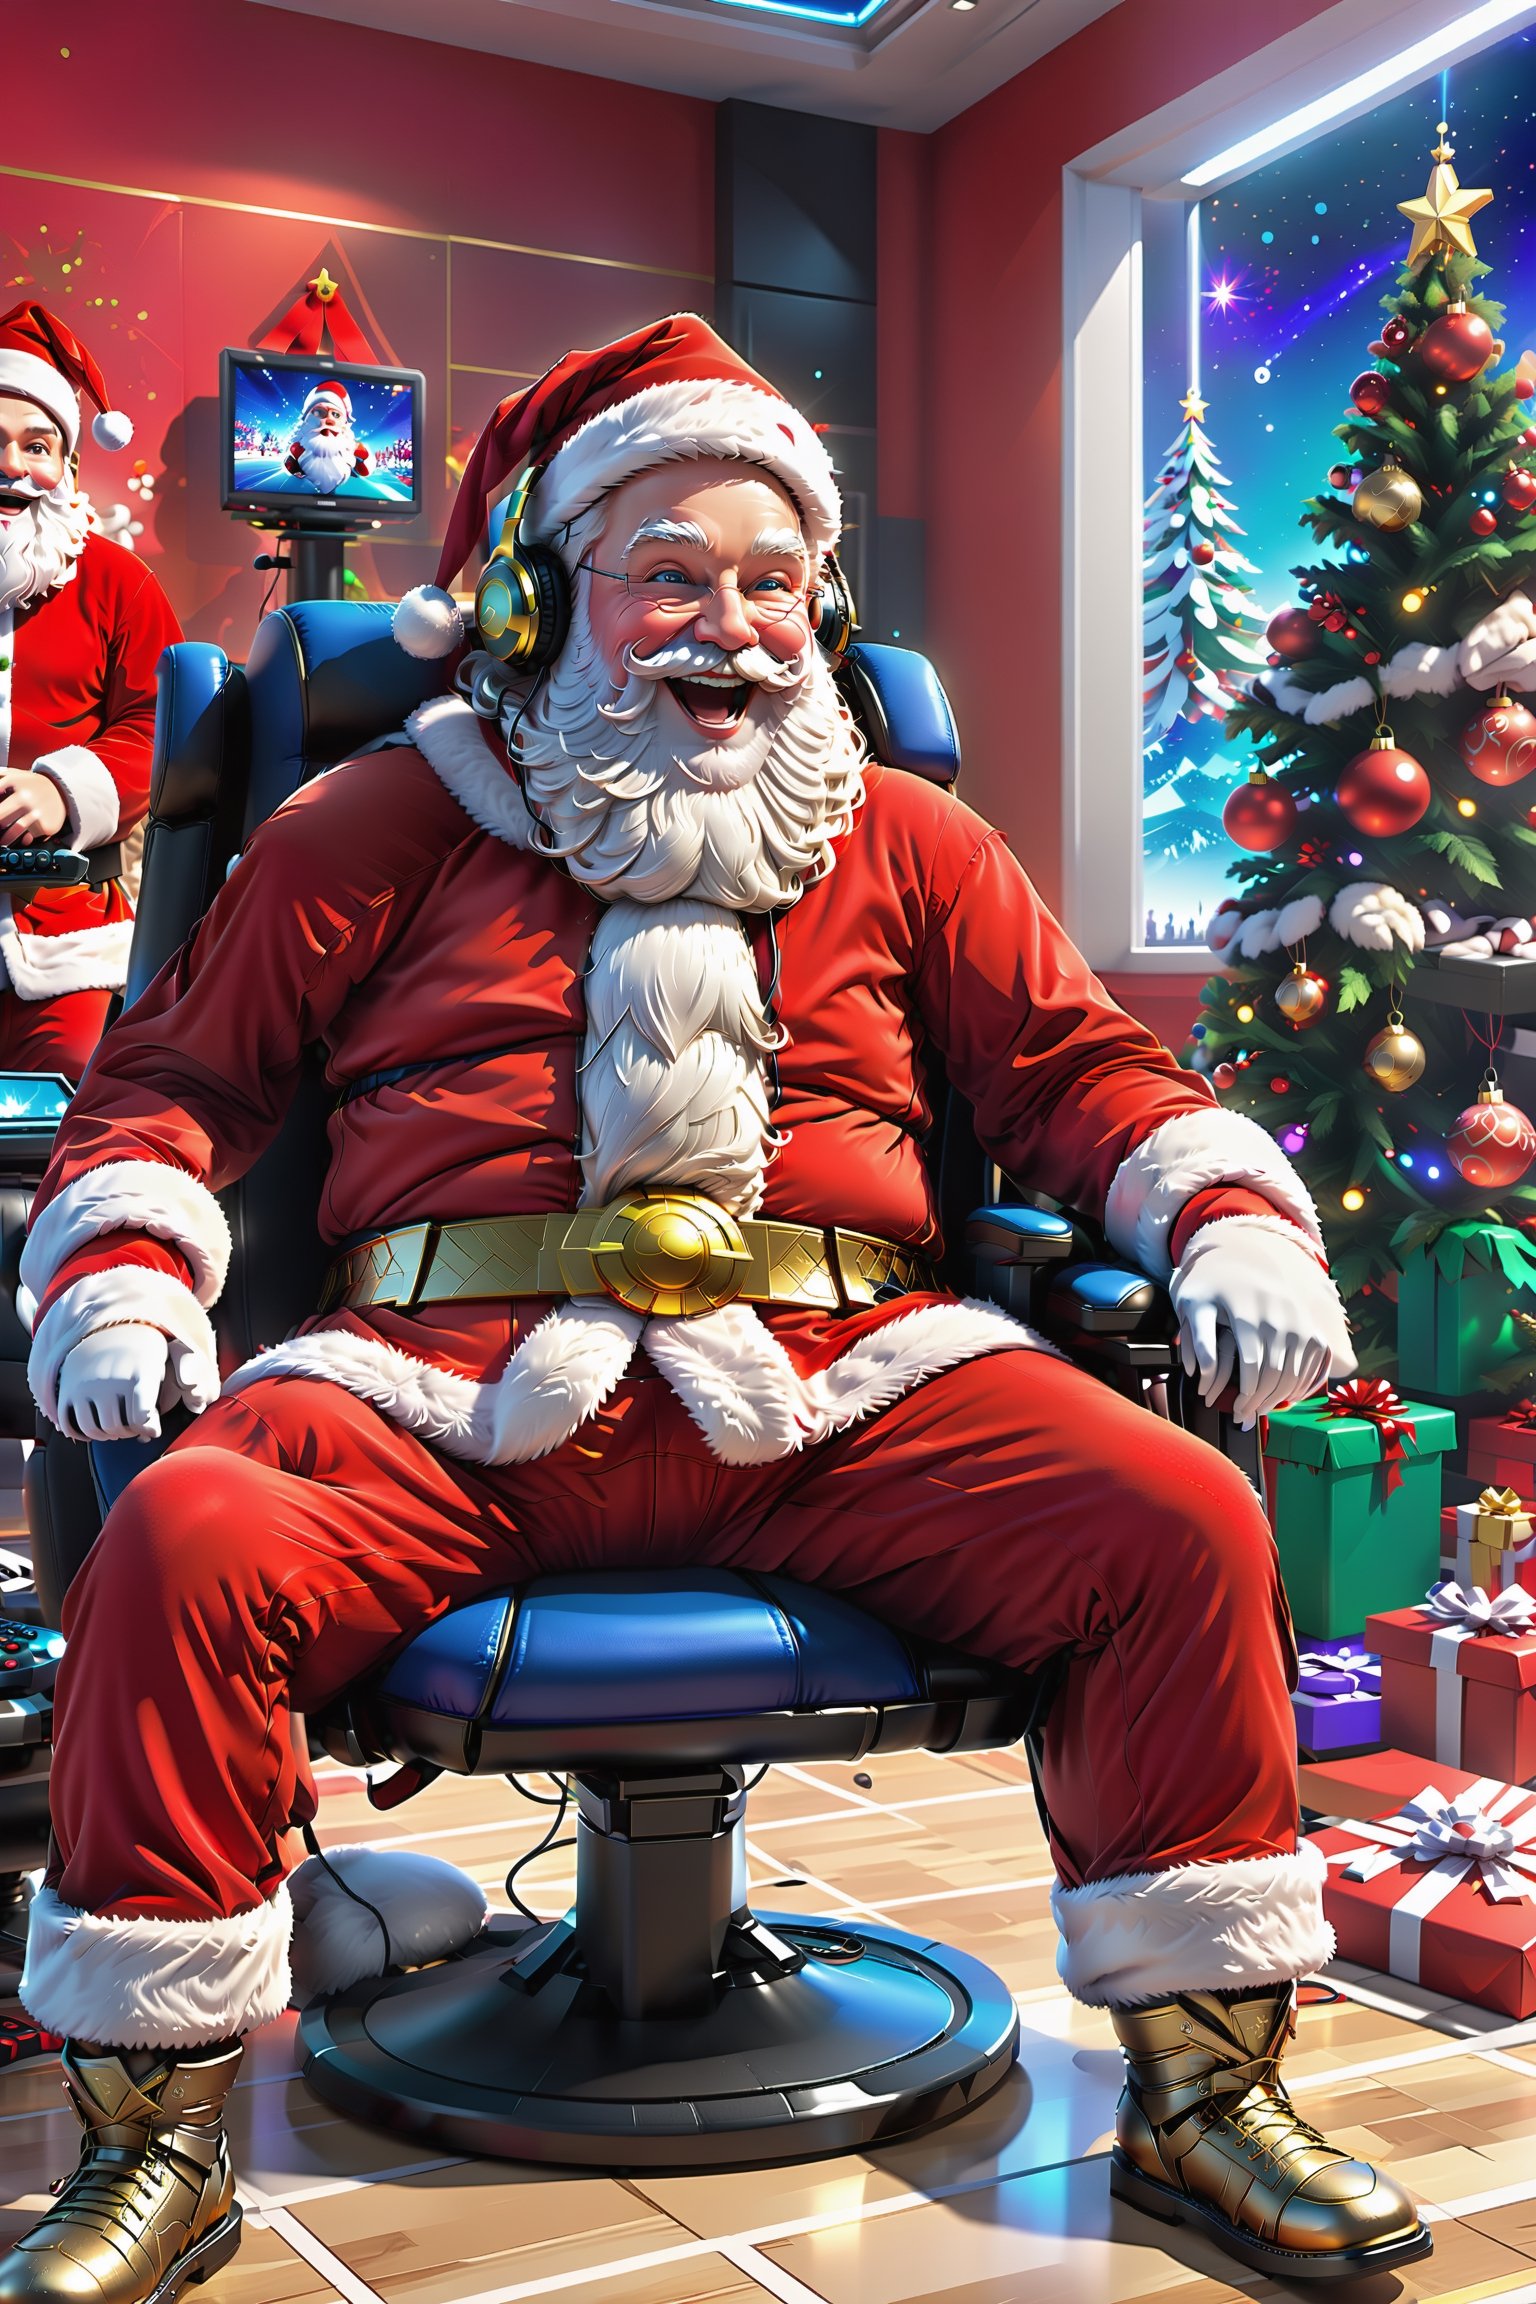 In this unique scene, Santa Claus enthusiastically participates in a {(((gaming tournament)))}, presenting an interesting combination of modern technology and traditional Christmas.

Santa is sitting on a shiny gaming chair, wearing a pair of professional gaming headphones and holding a very skillfully handled gamepad. Dressed in a red and white gaming suit, there may be some Christmas patterns and decorations that add a festive touch to the whole picture.

In front of the screen is a high-definition monitor displaying Christmas-themed gameplay. It could be an intense eSports match, and Santa Claus is into it, focused and excited. His eyes reveal a desire to win, and a confident smile hangs at the corner of his mouth.

There may be some spectators around, who may also be other Santas or various Christmas characters, excitedly watching the game. There may be some Christmas lights adorning the walls of the gaming room, adding color to the match scene.

The whole scene is full of modern technology and gaming elements, which combine with traditional Christmas images to present a new and interesting picture. This image shows the vitality of modern technology and also incorporates the joyful atmosphere of traditional festivals, giving a unique visual experience.